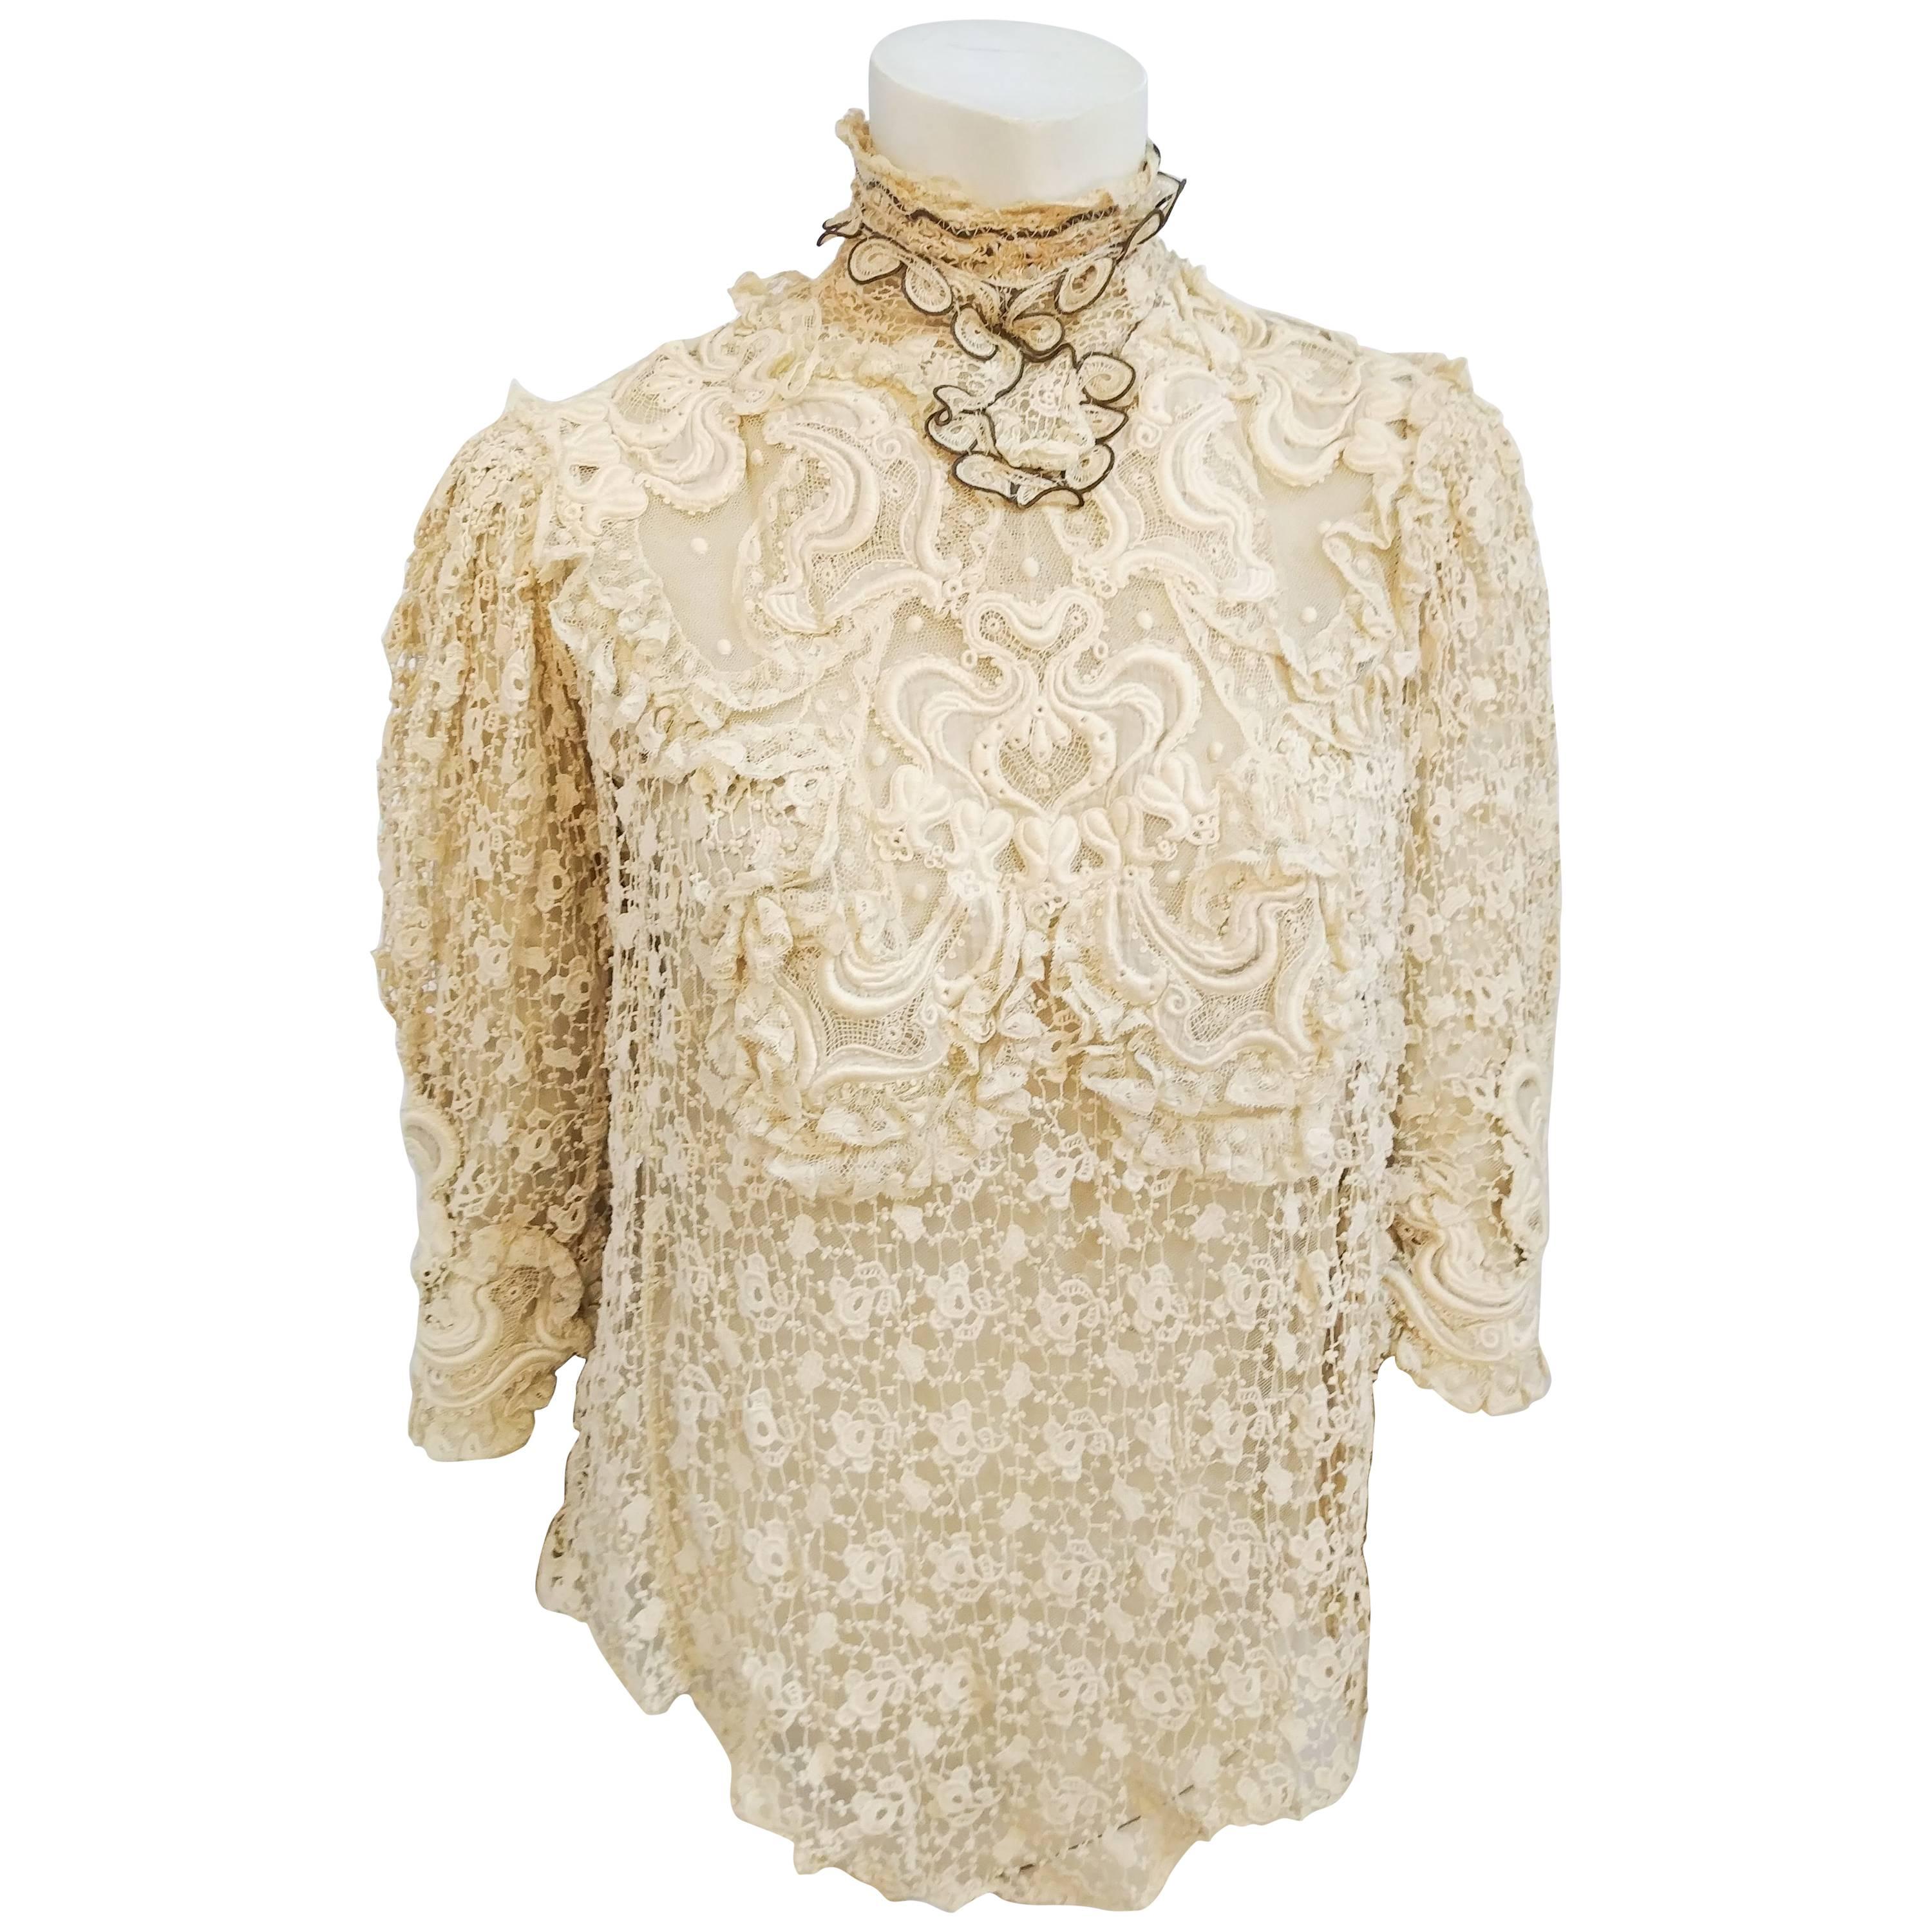 Edwardian Cream All-Over Lace Blouse